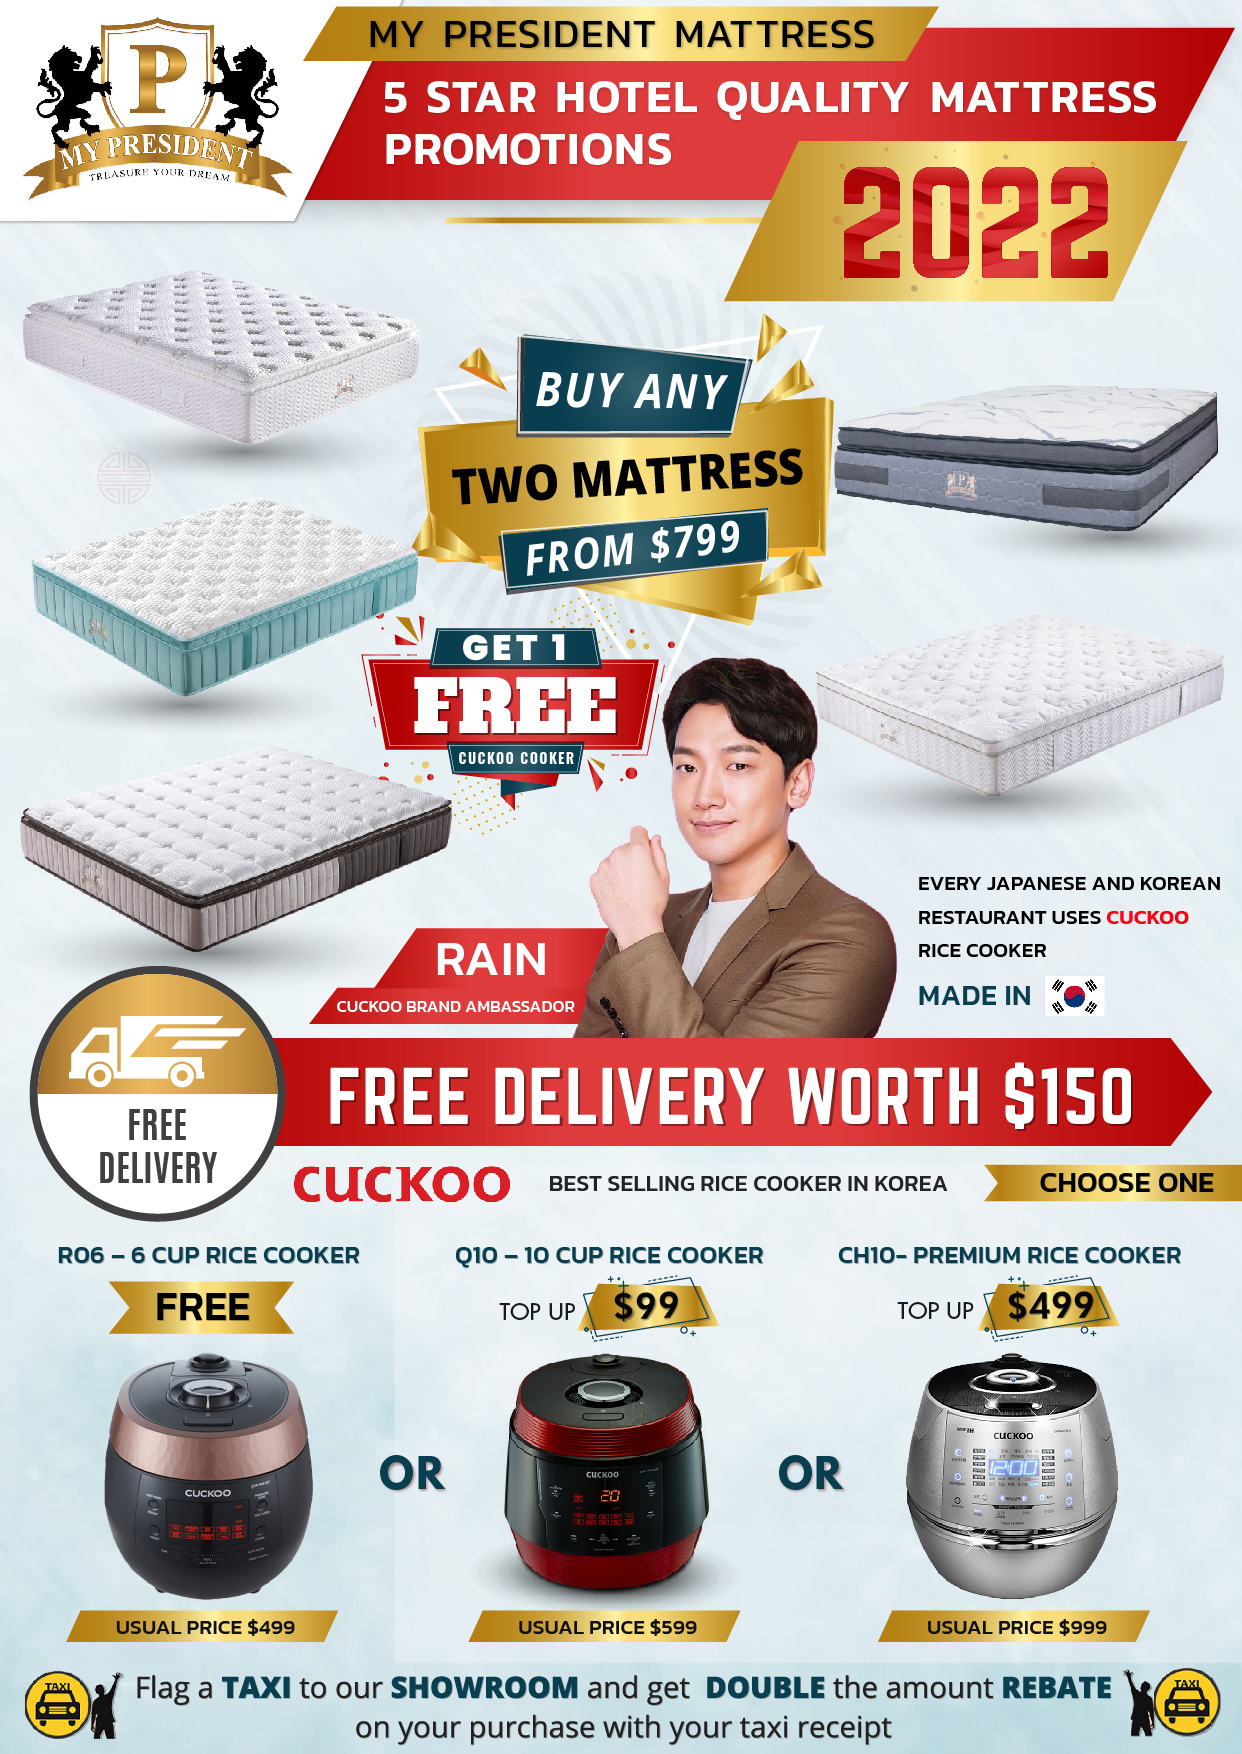 5 Star Hotel Quality Mattress Promotions 2022